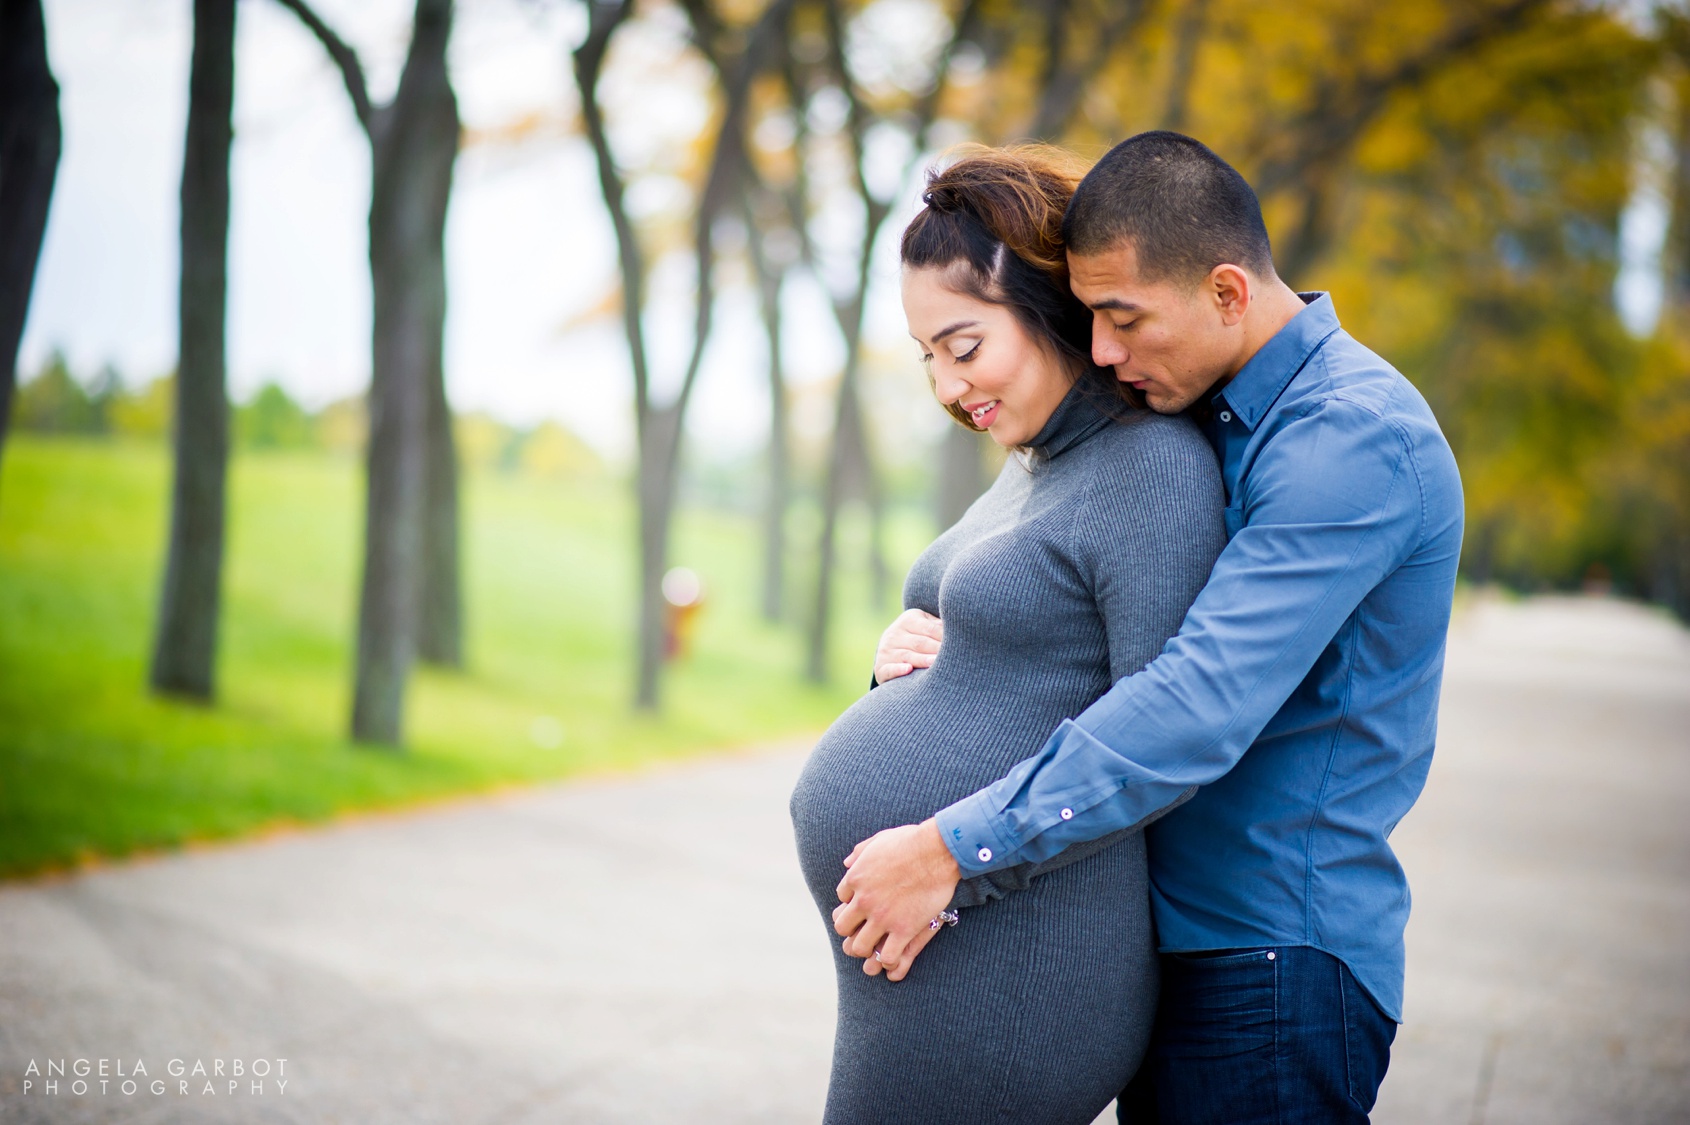 chicago maternity session, chicago baby bump photos, chicago maternity photographer